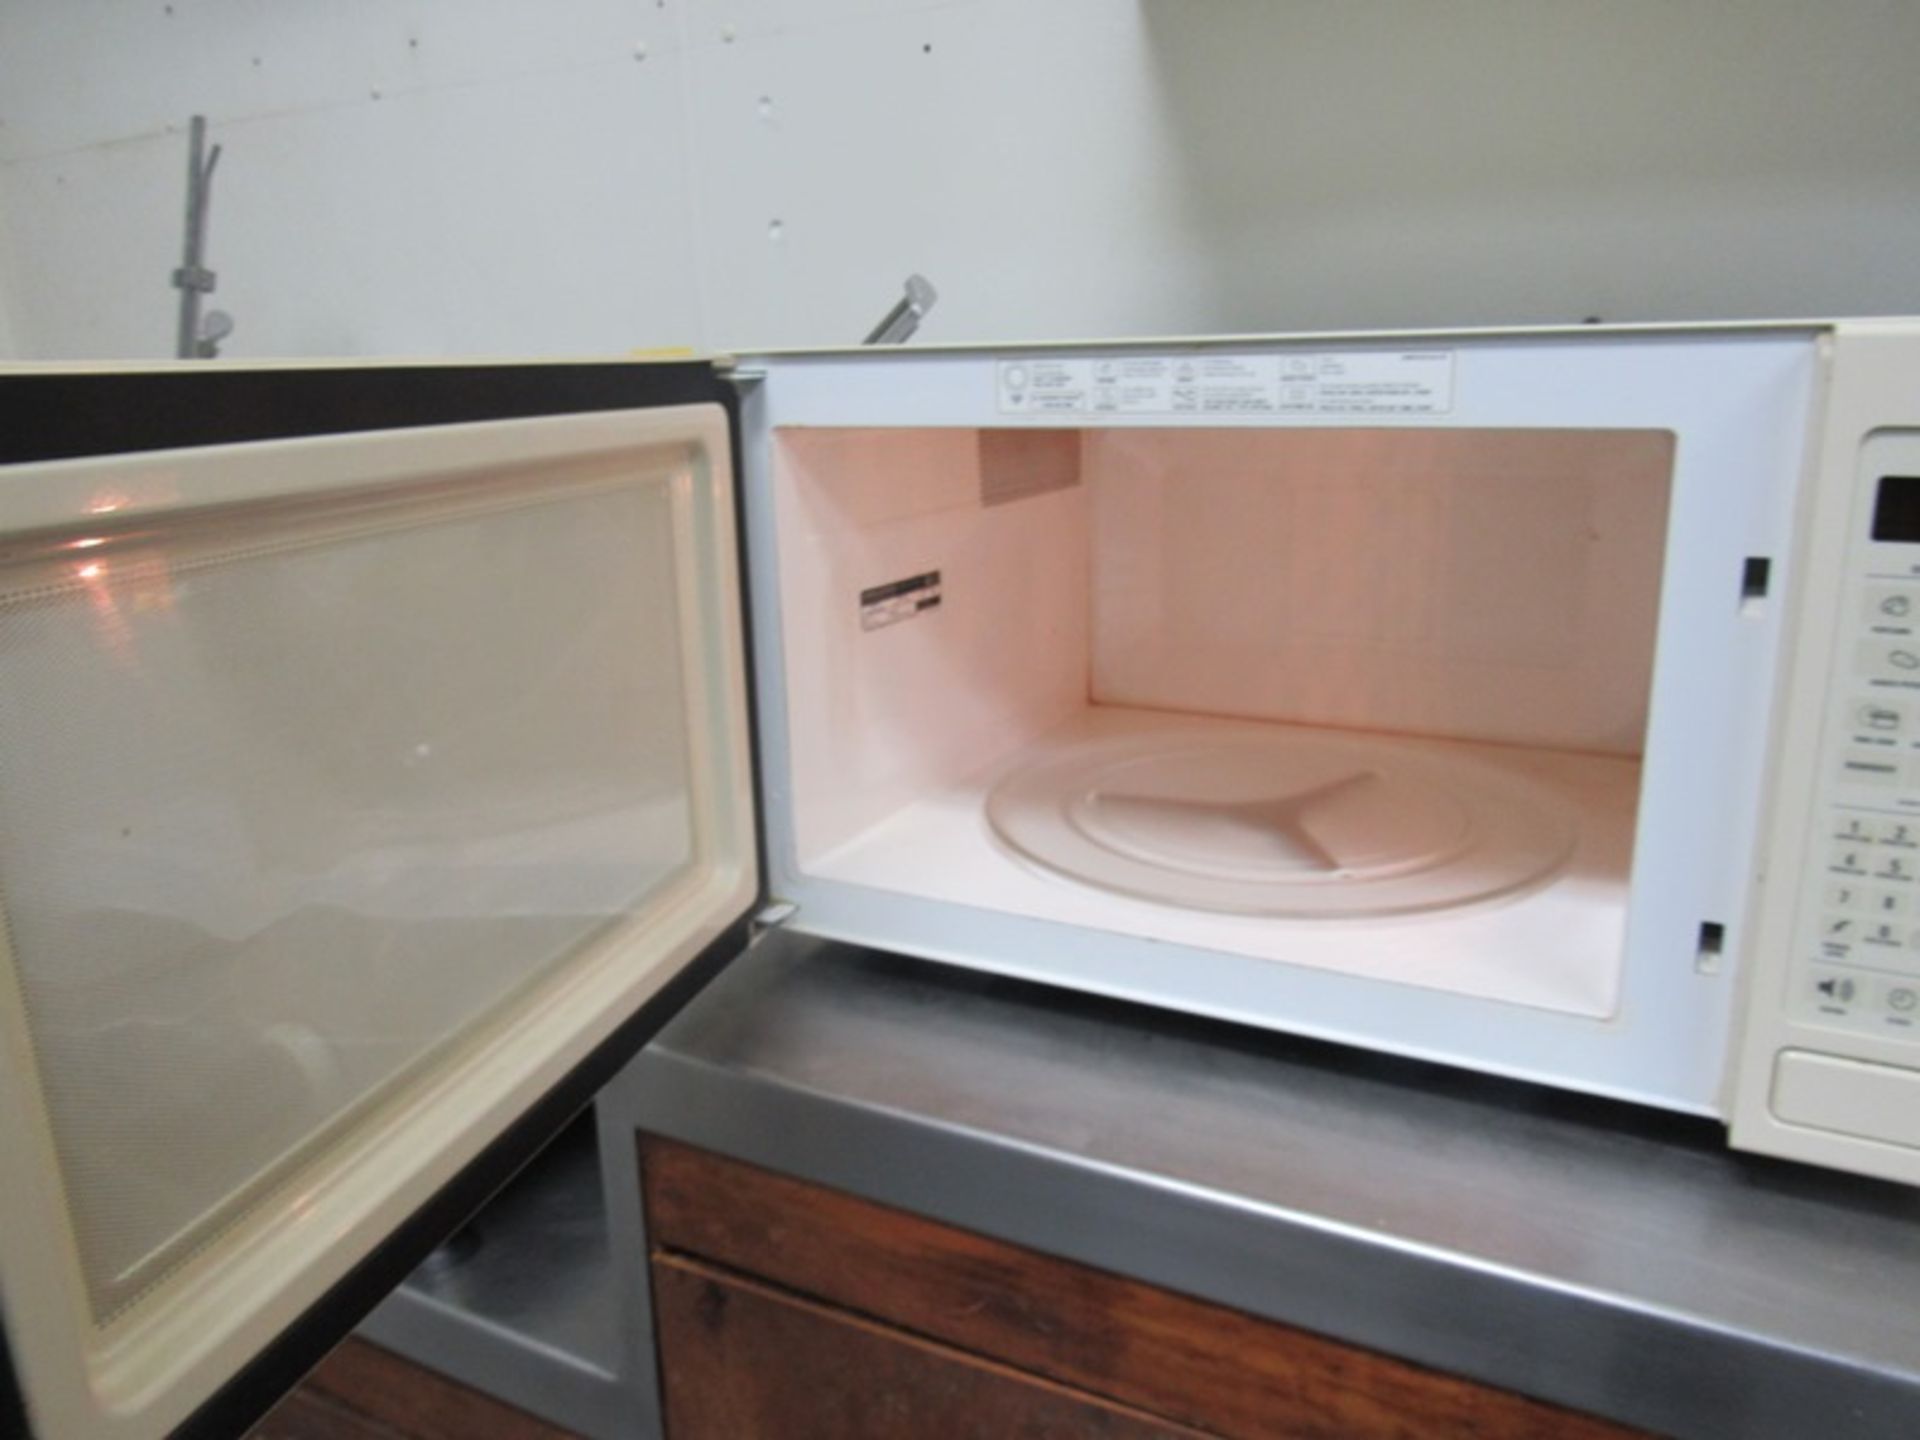 G.E. Mdl. JES1851AB001 Microwave Oven (Required Loading Fee $5.00 - Small Items Will Be Loaded - Image 2 of 2